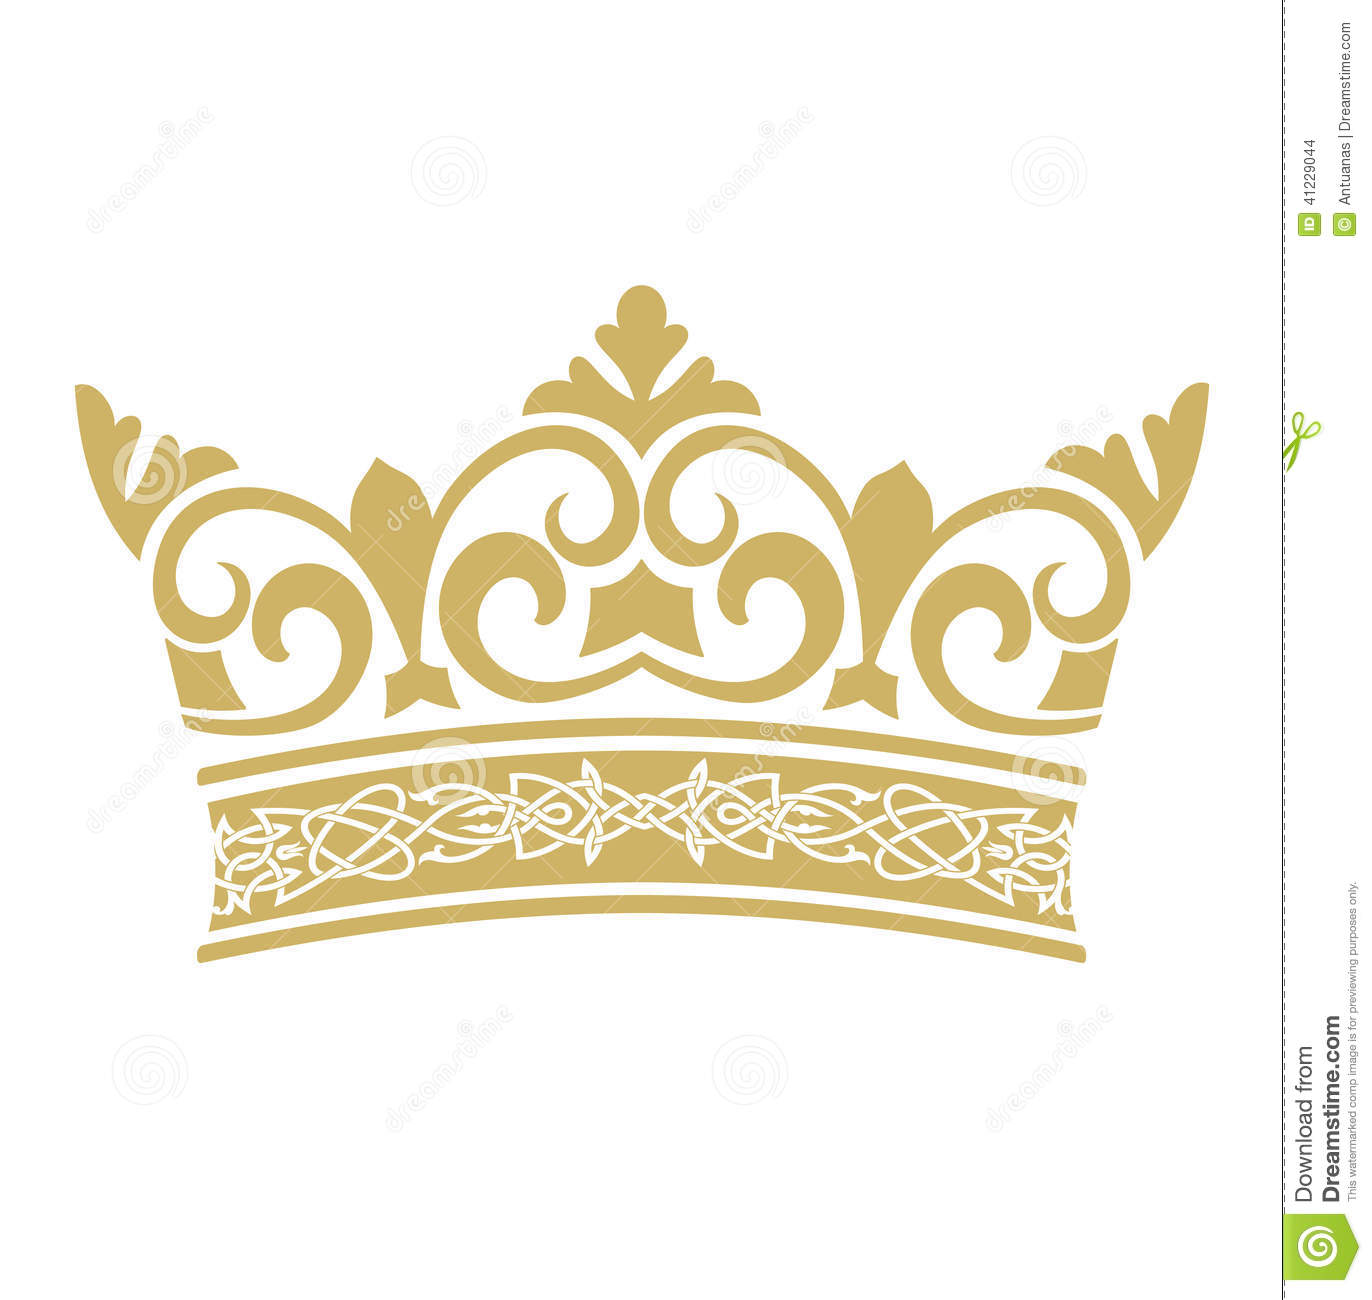 Goldene Krone Png - Krone Hdpng.com , Transparent background PNG HD thumbnail